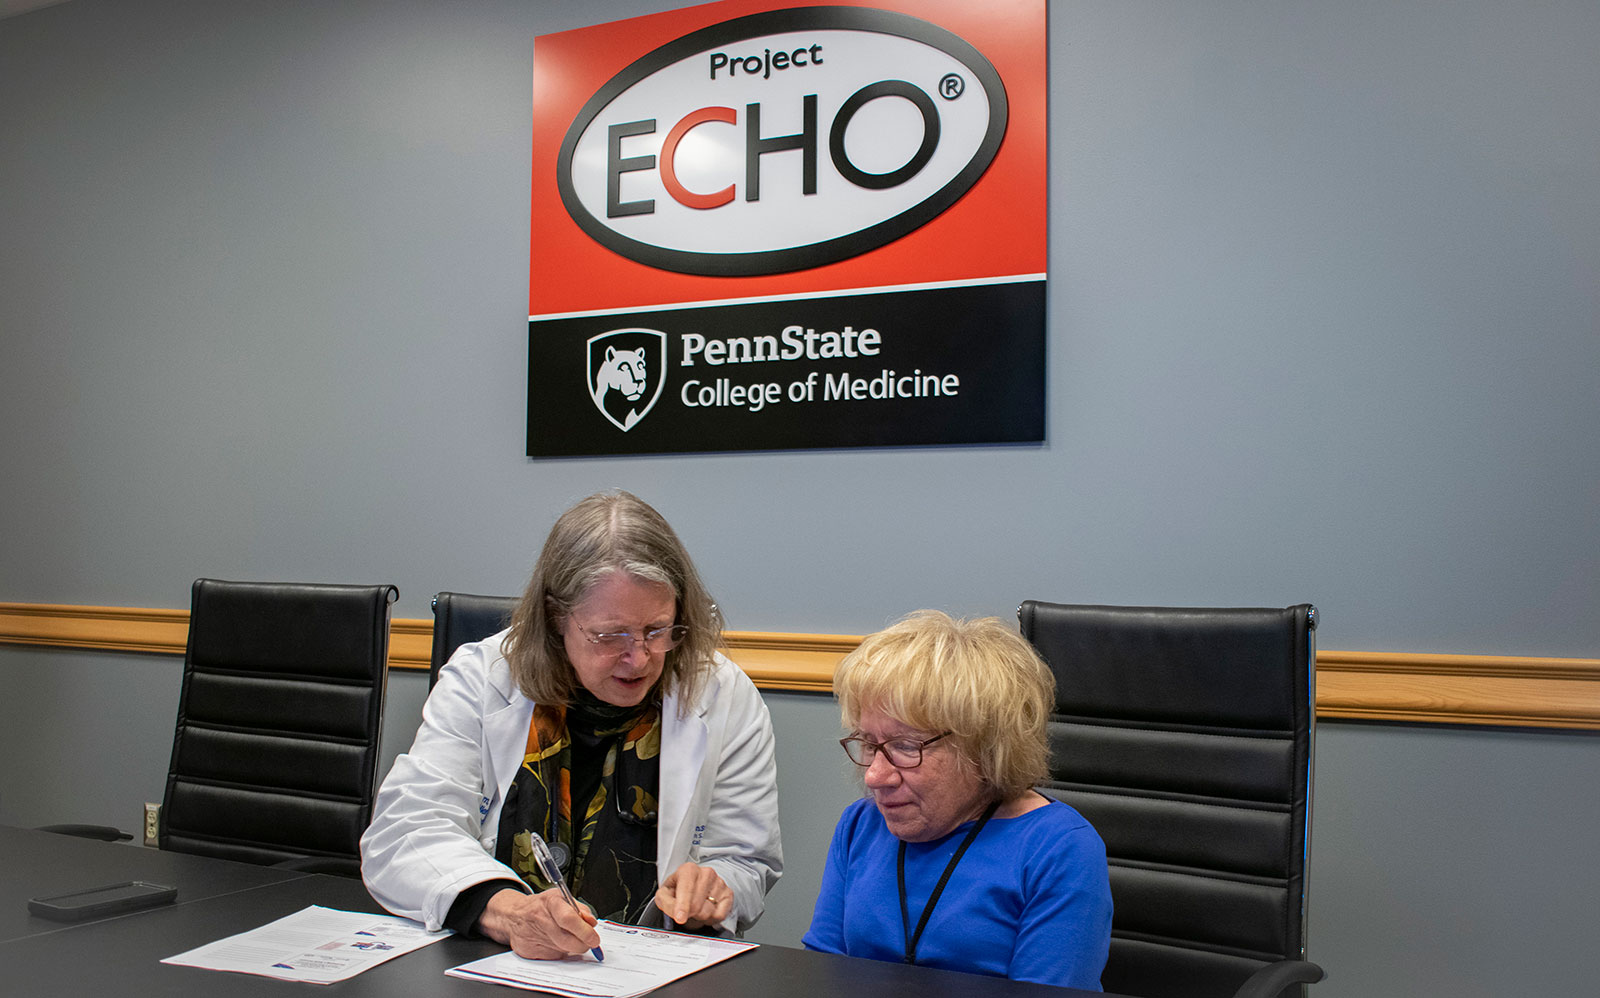 Two women sit at a table working with a Project ECHO logo on the wall behind them.